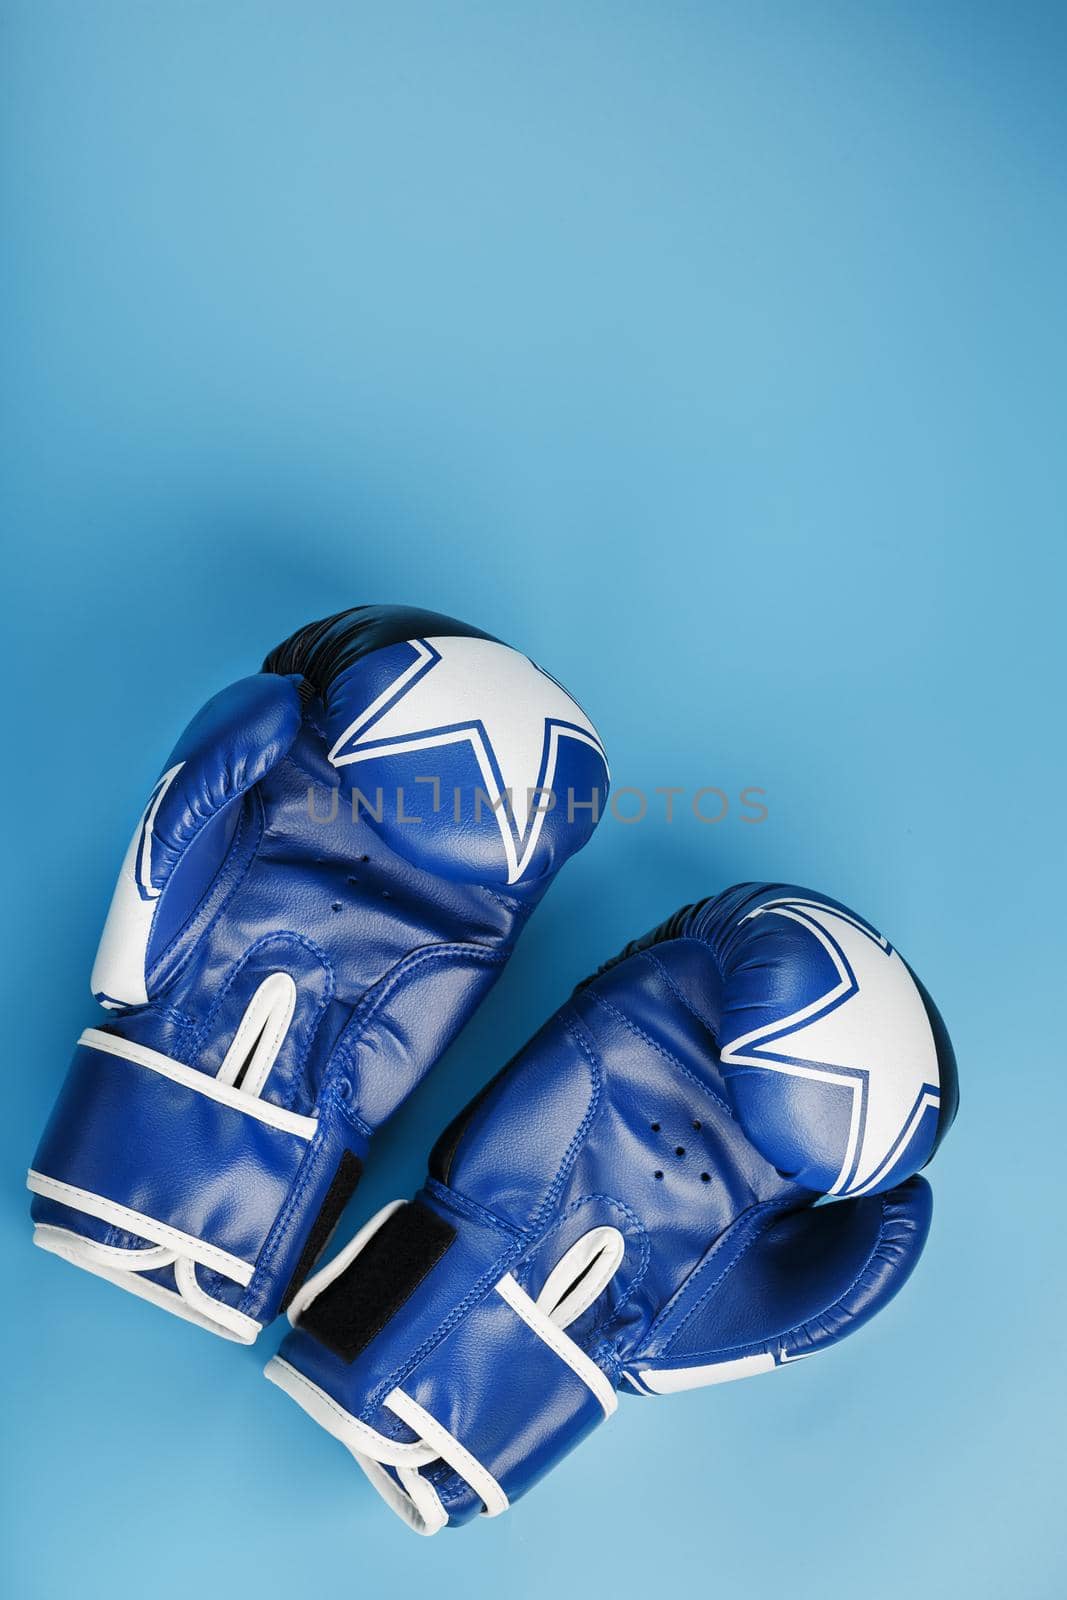 A pair of leather Boxing gloves on a blue background, free space. The concept of fighting and fighting with difficulties.